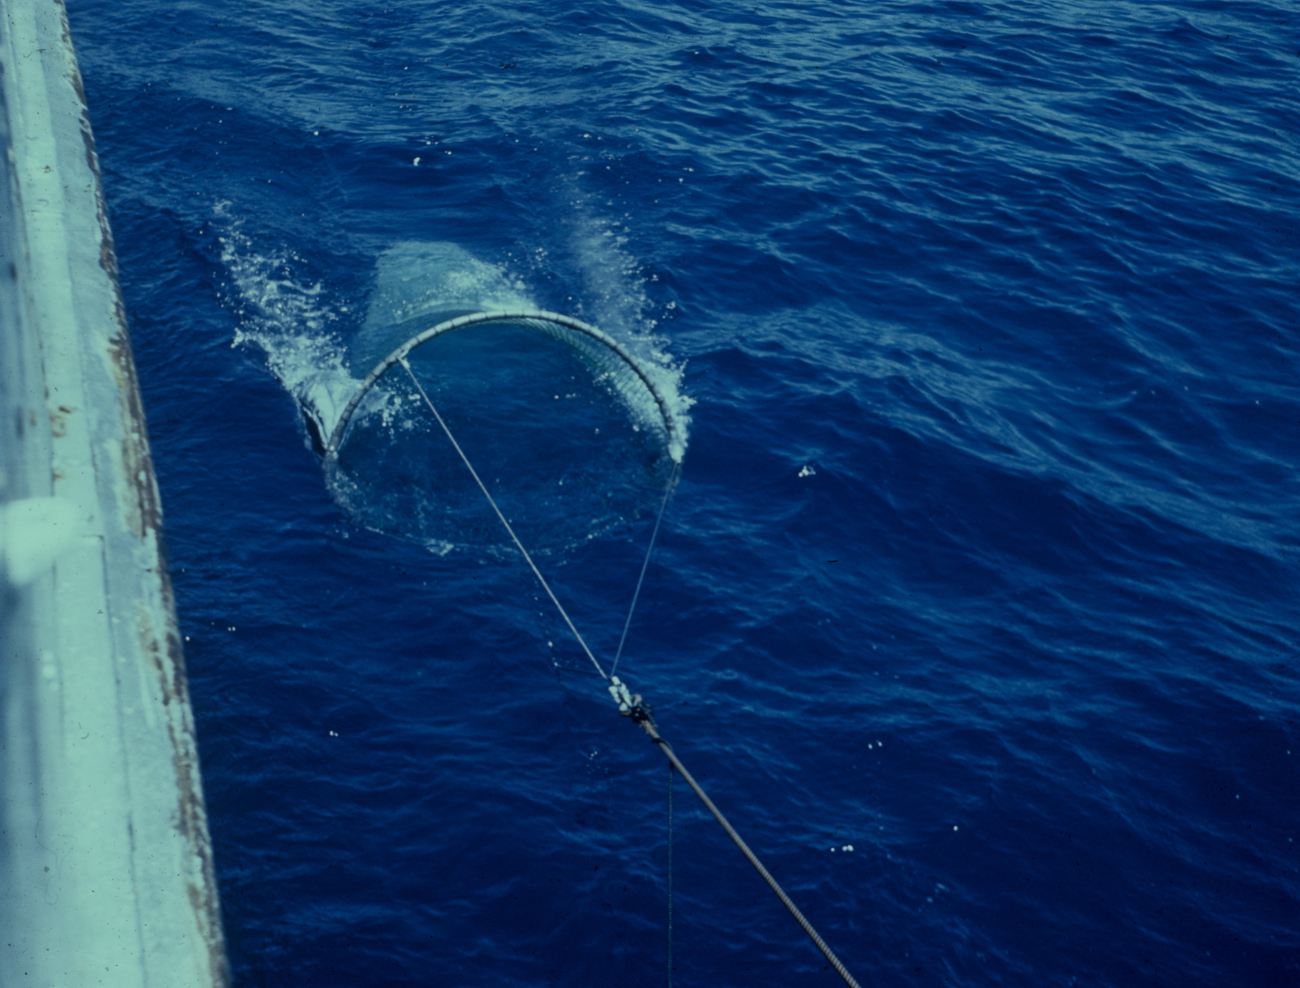 Towing net designed to capture larval and juvenile fish